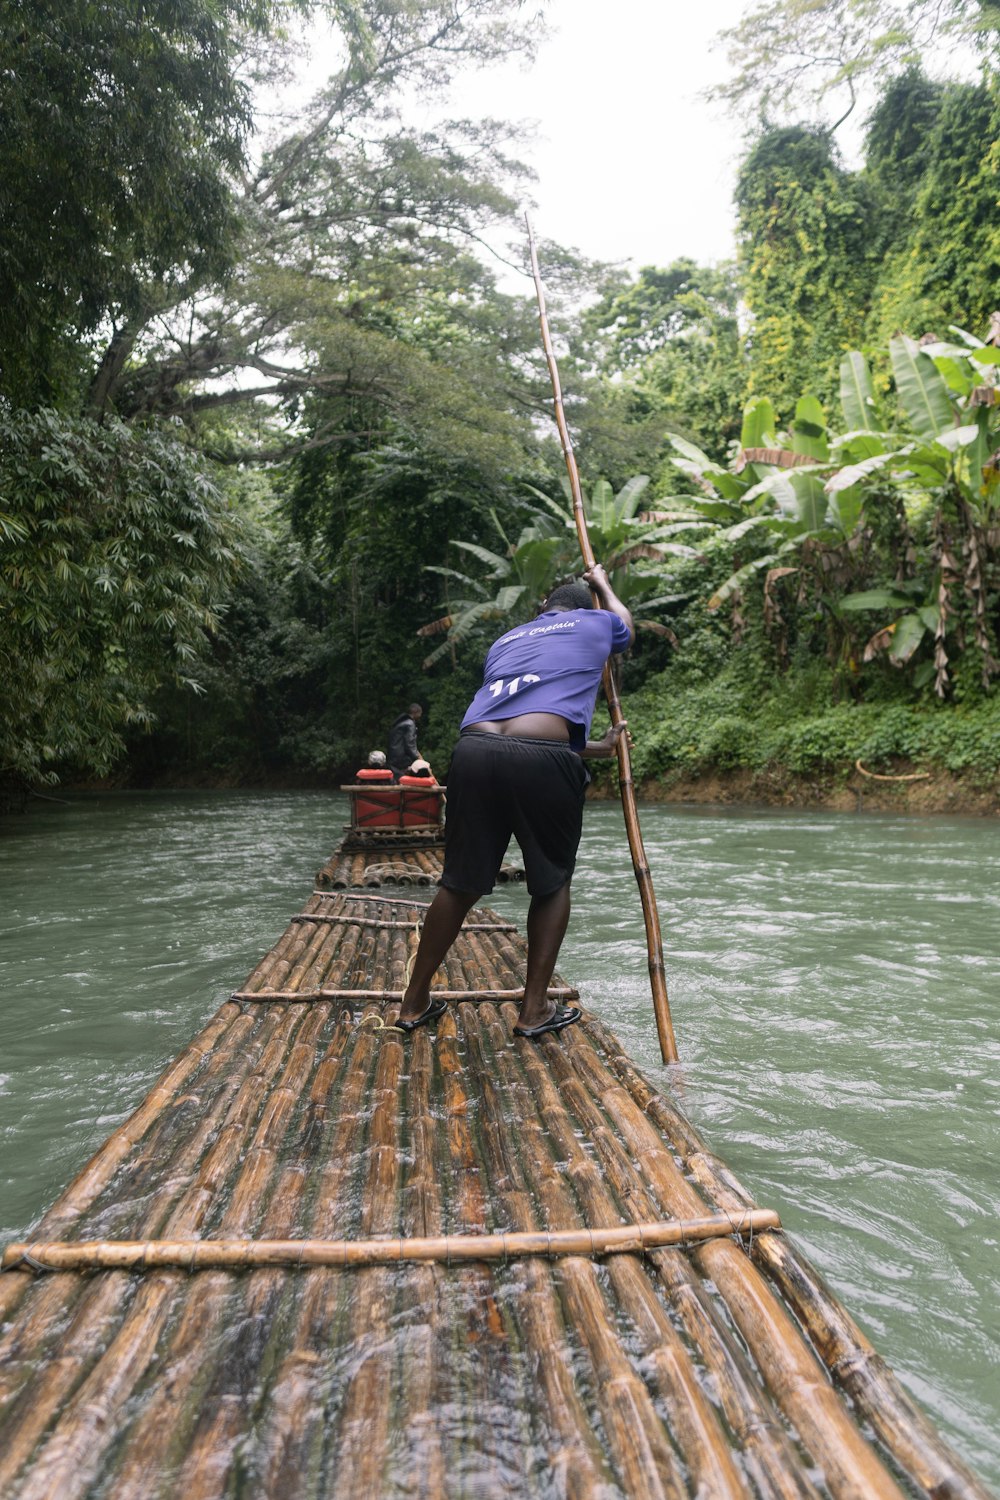 a person standing on a bamboo raft in a river